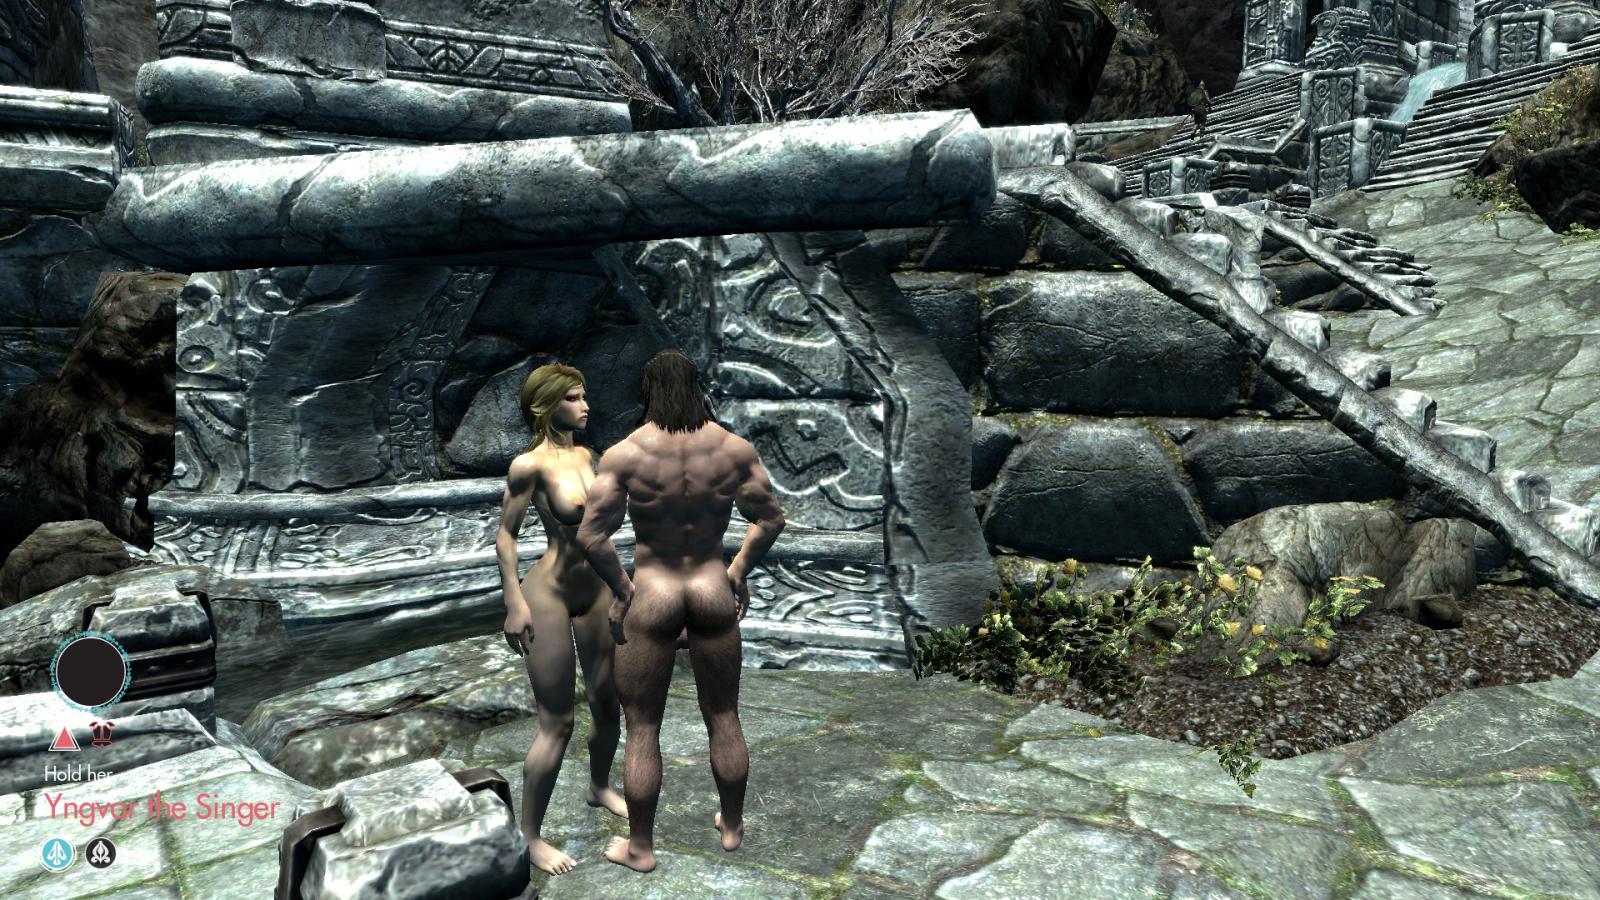 0sex Skyrim Sex Sim Other 0s Content Wip Page 163 Skyrim Adult